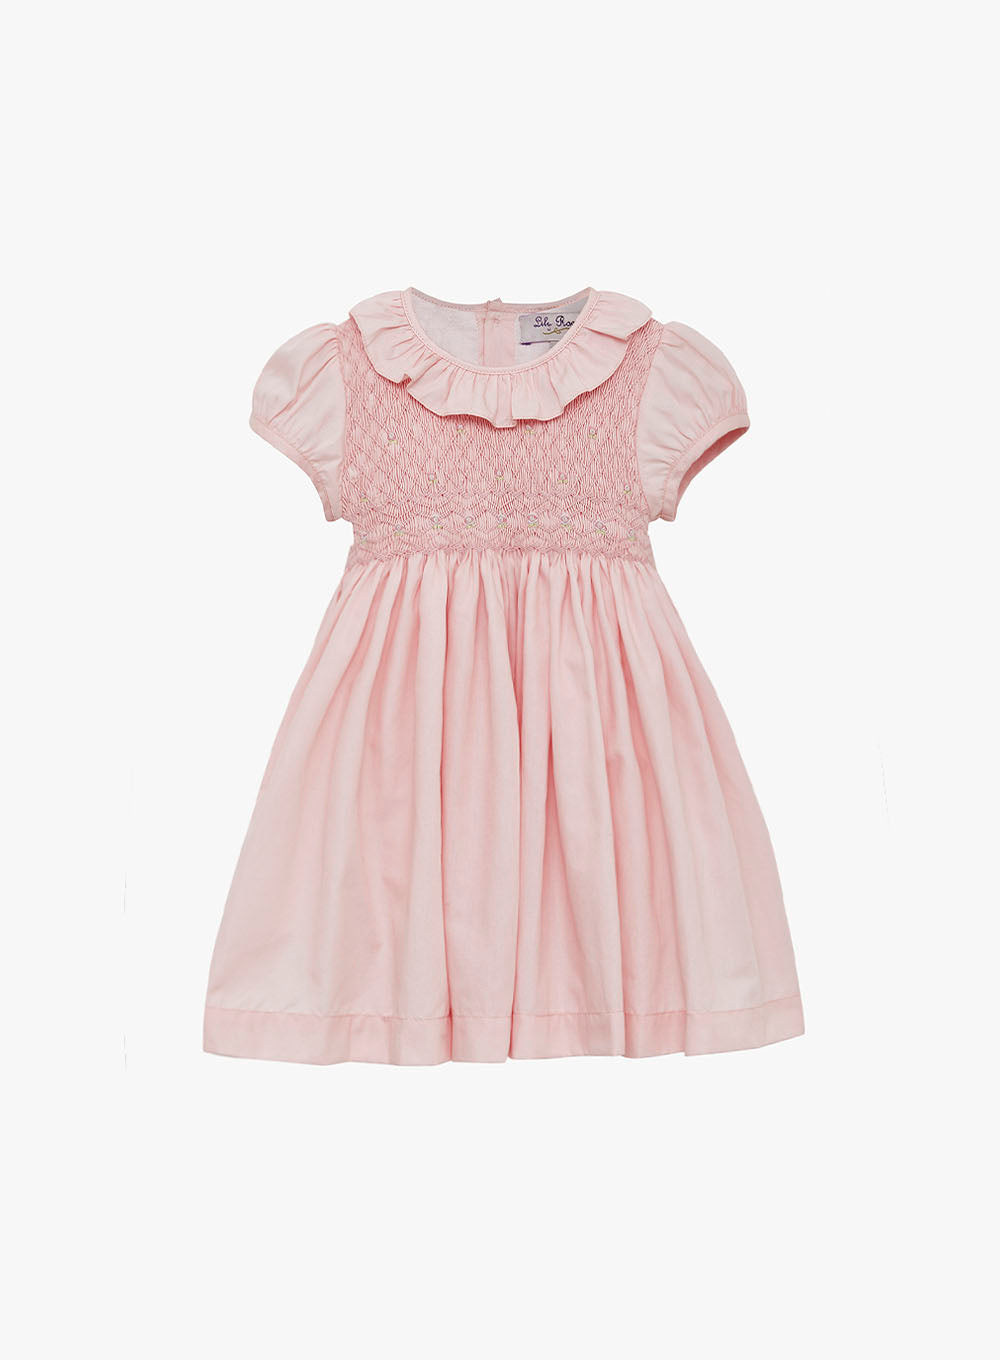 Little Willow Rose Hand Smocked Dress in Pink